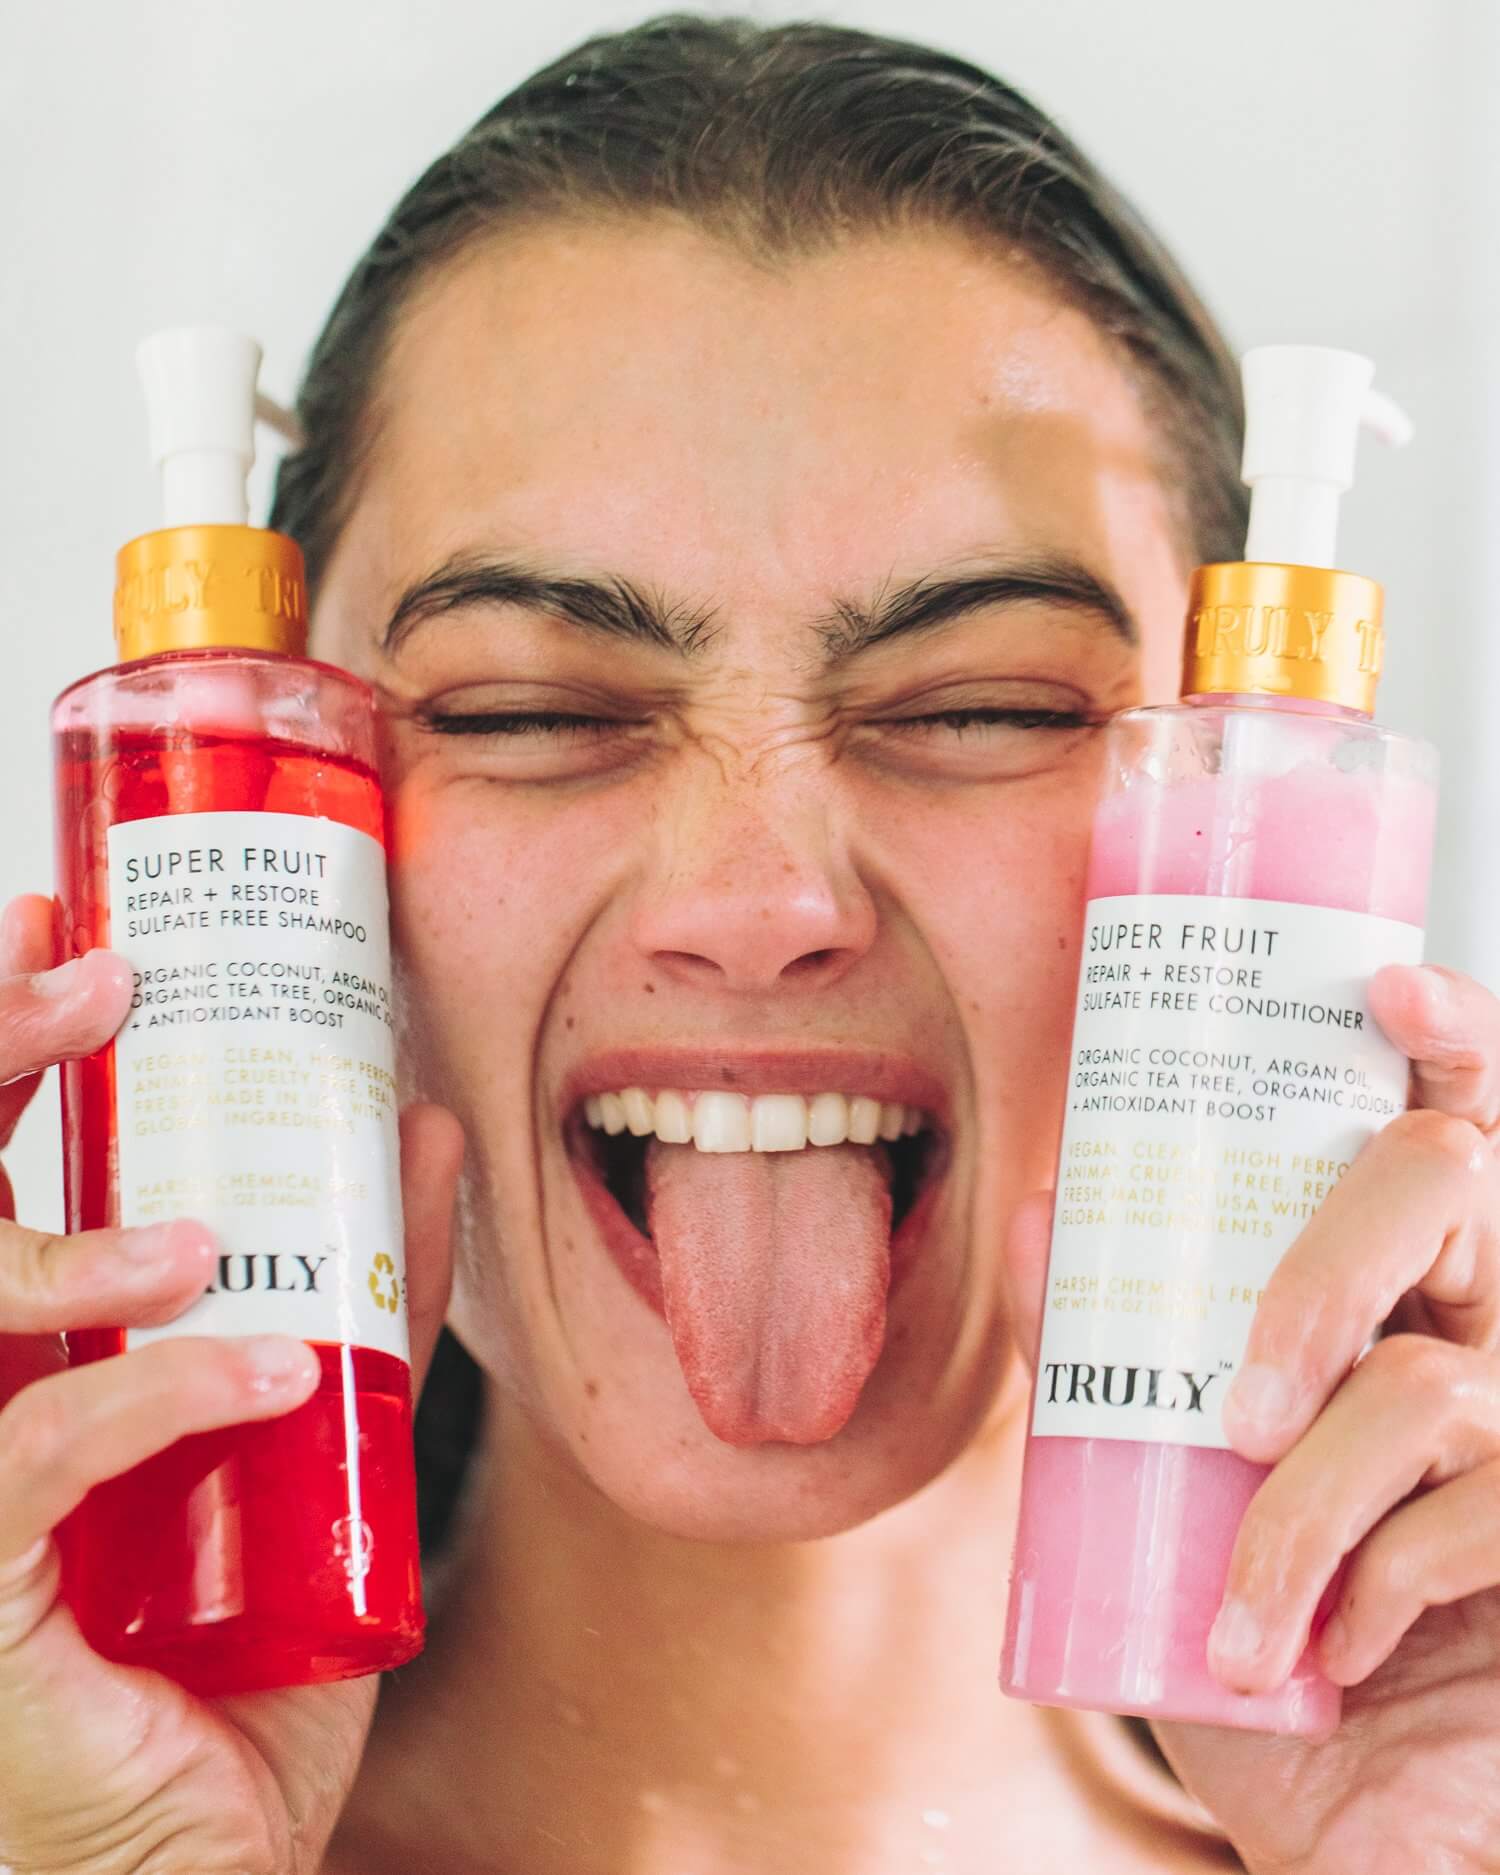 Hair Growth Shampoo and Mix Fruit Face Wash Combo